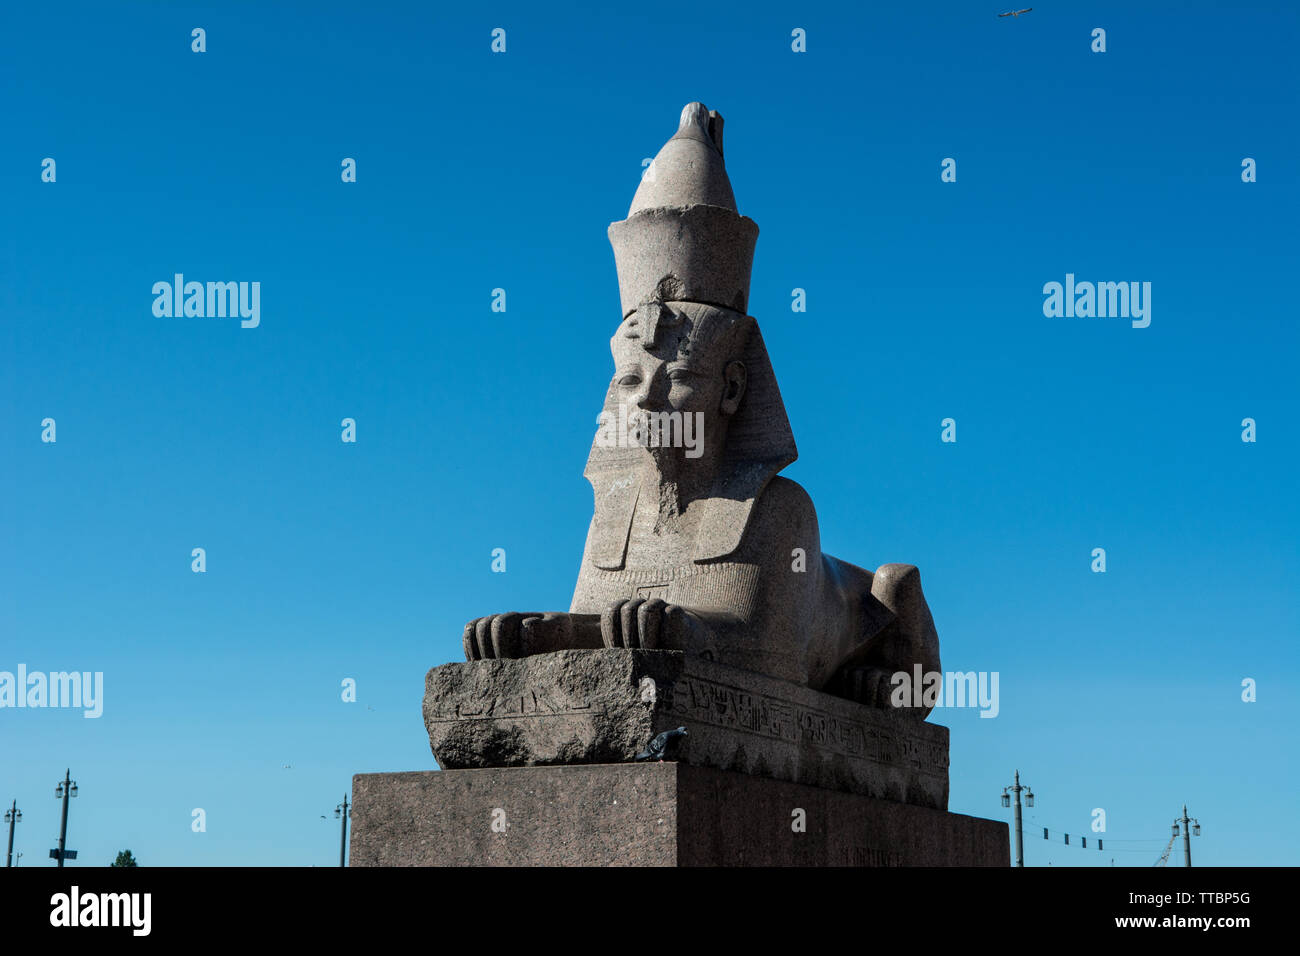 Quay with Sphinxes Saint Petersburg Russia Stock Photo